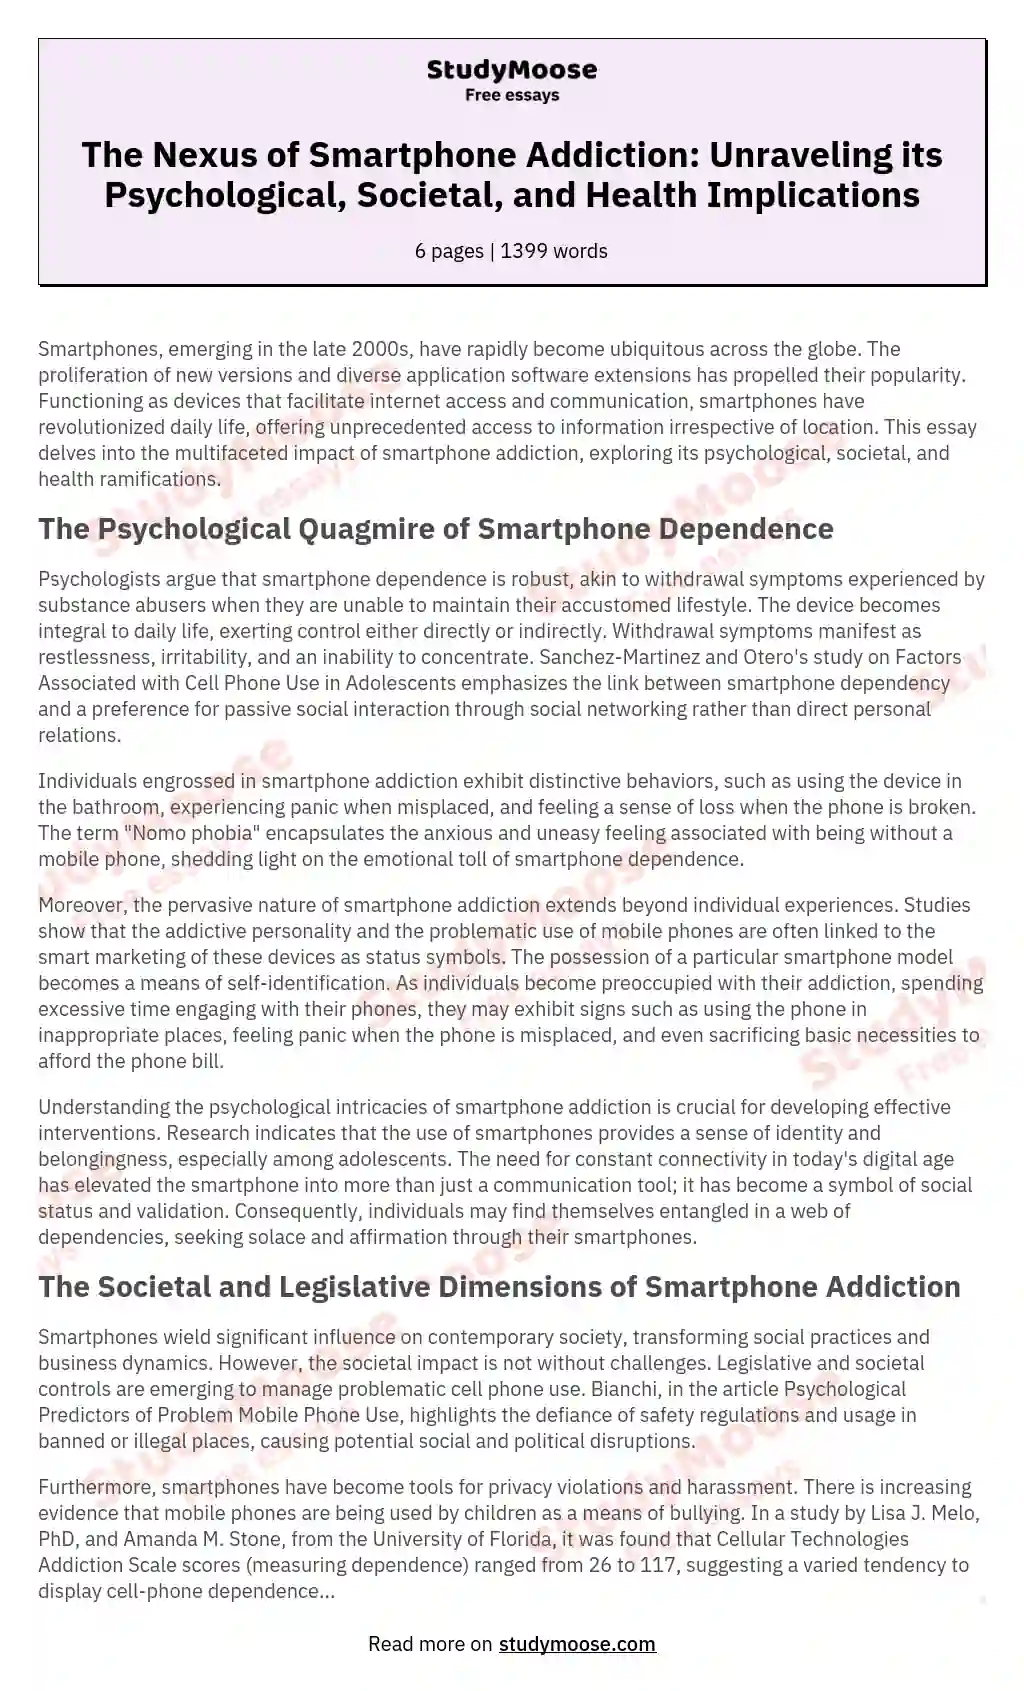 The Nexus of Smartphone Addiction: Unraveling its Psychological, Societal, and Health Implications essay